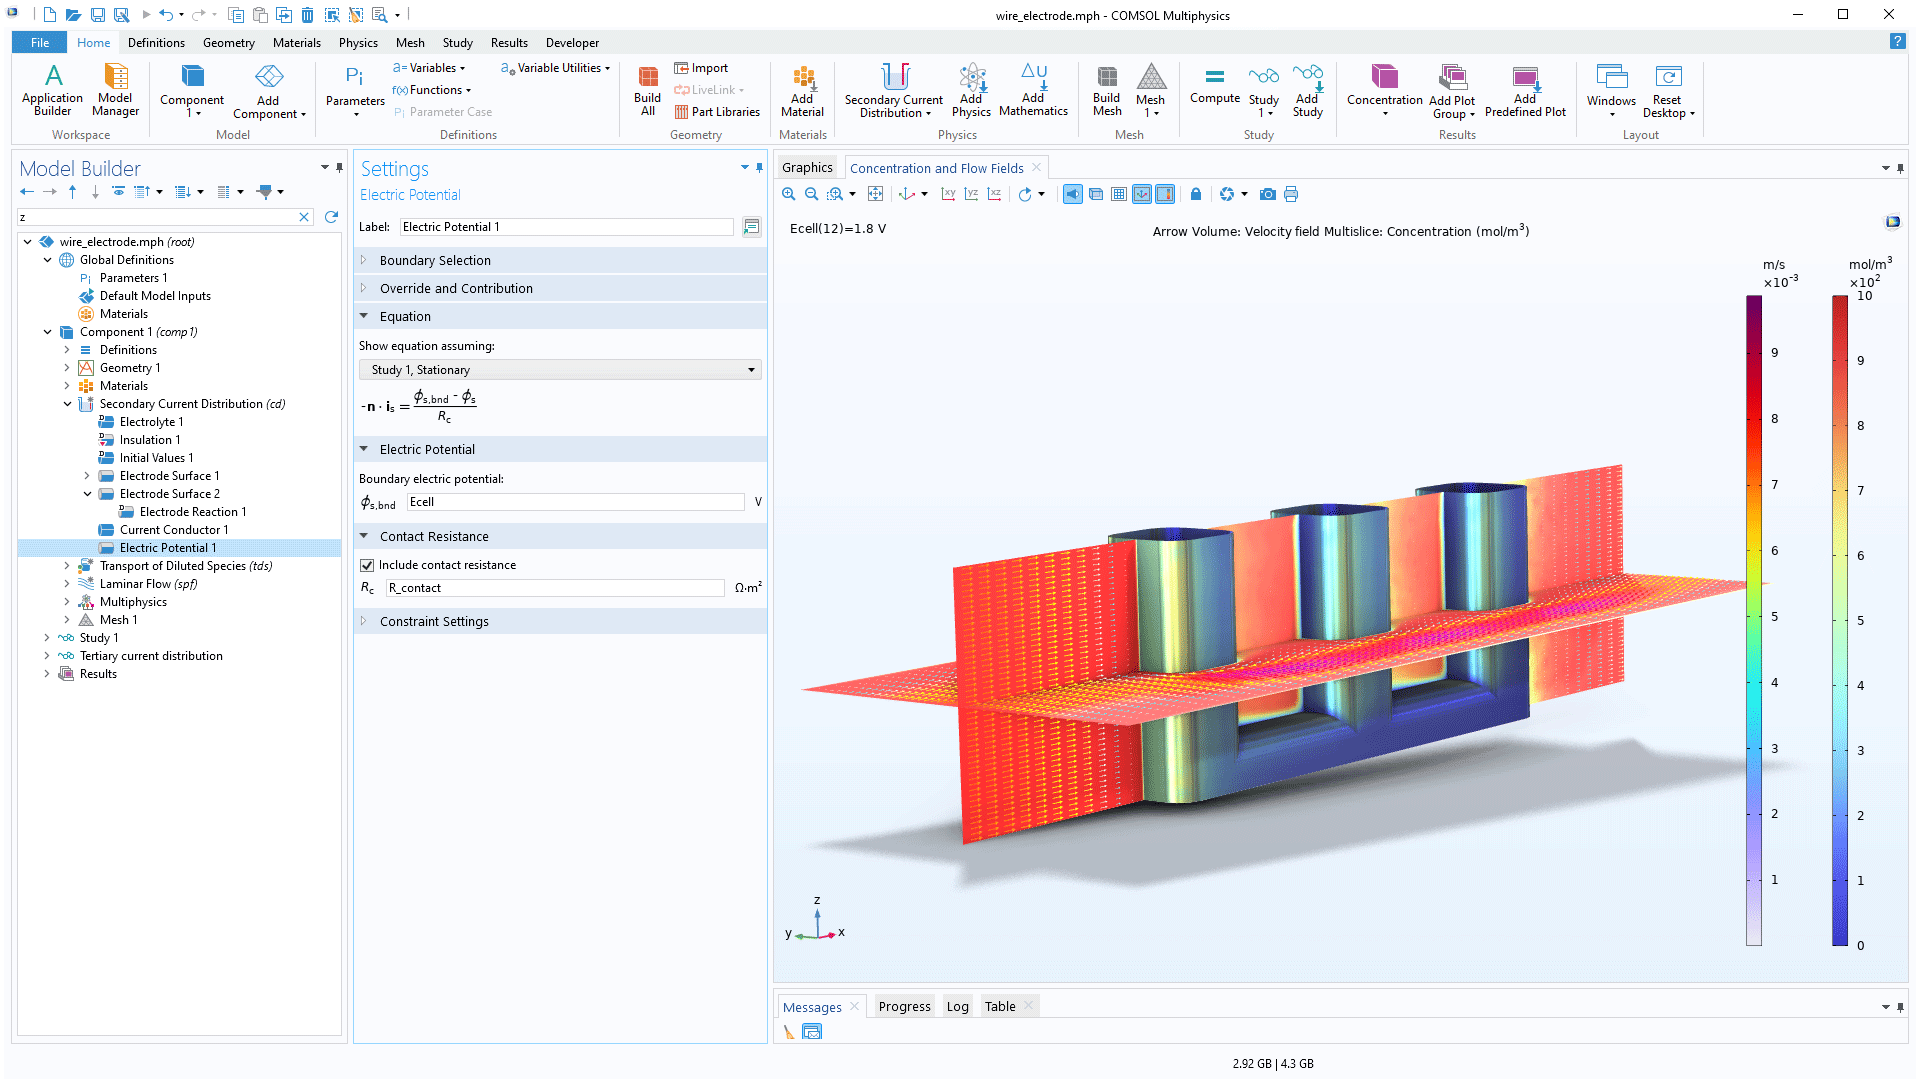 The COMSOL Multiphysics UI showing the Model Builder with the Electrode Potential node highlighted, the corresponding Settings window, and a wire electrode model in the Graphics window.